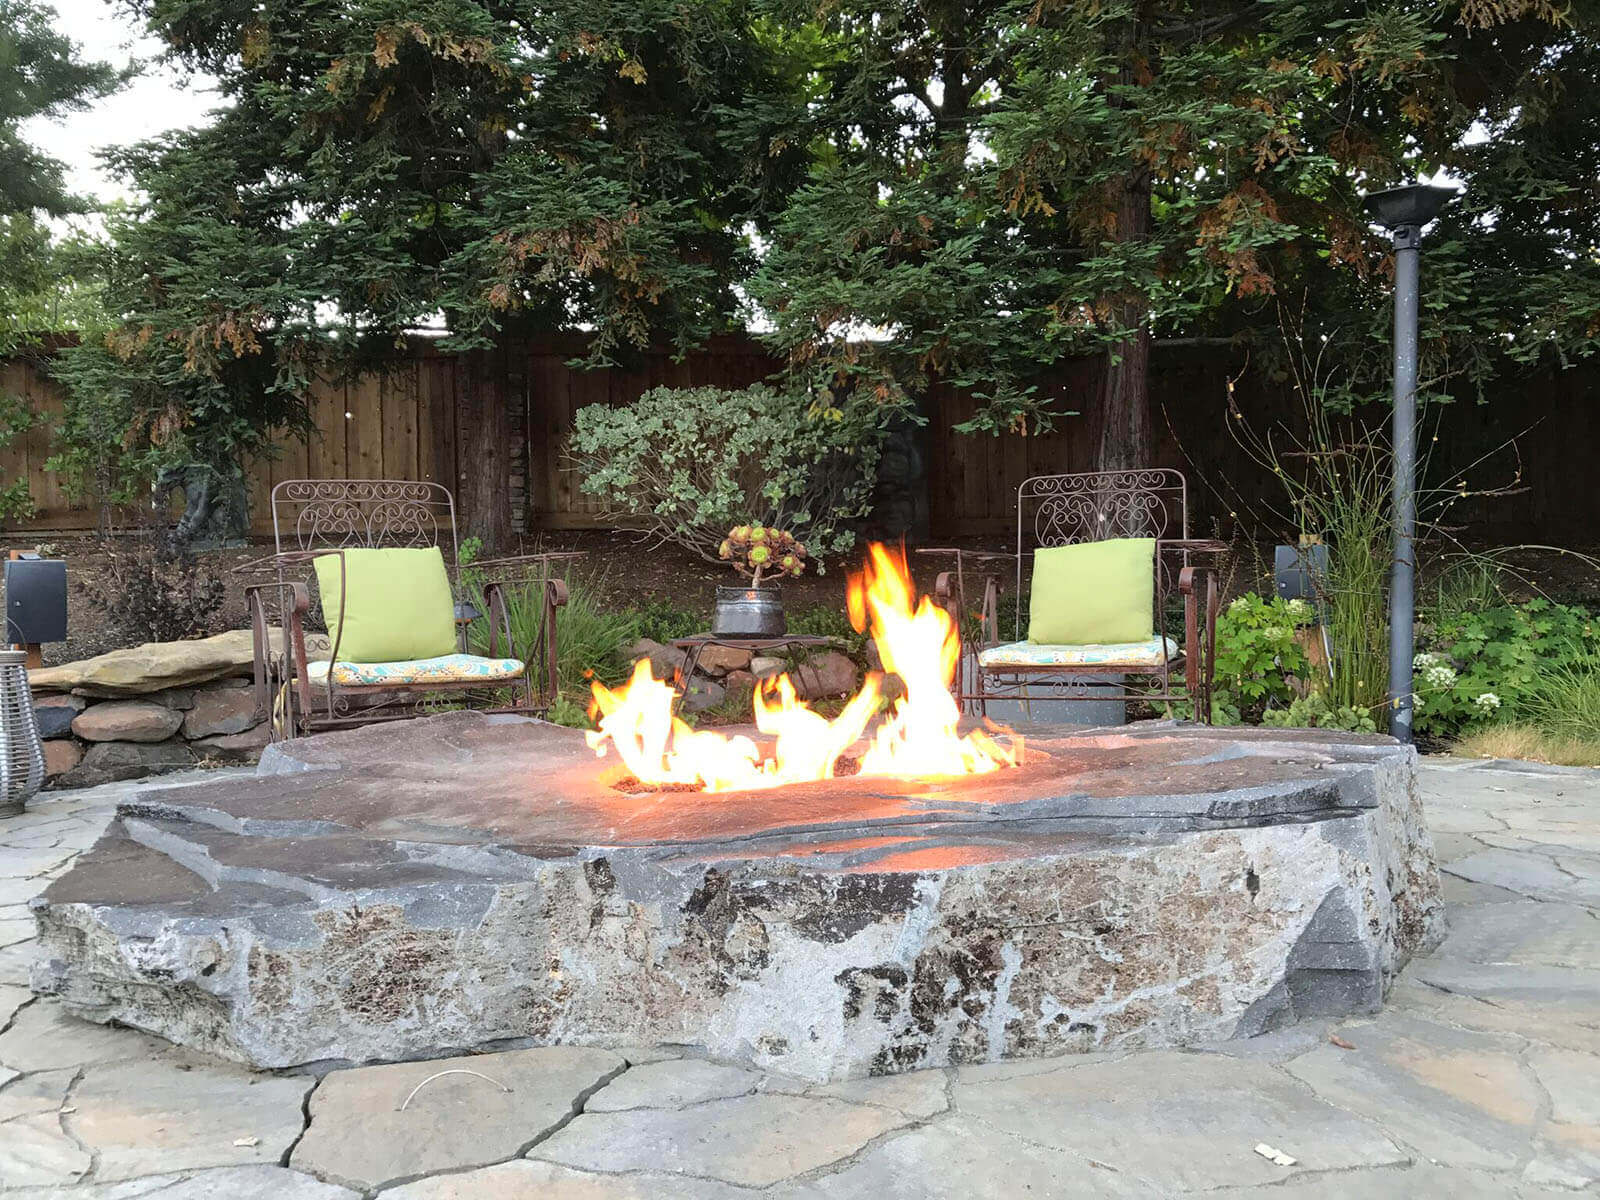 Natural looking stone fireplace with laid stone patio and metal chairs